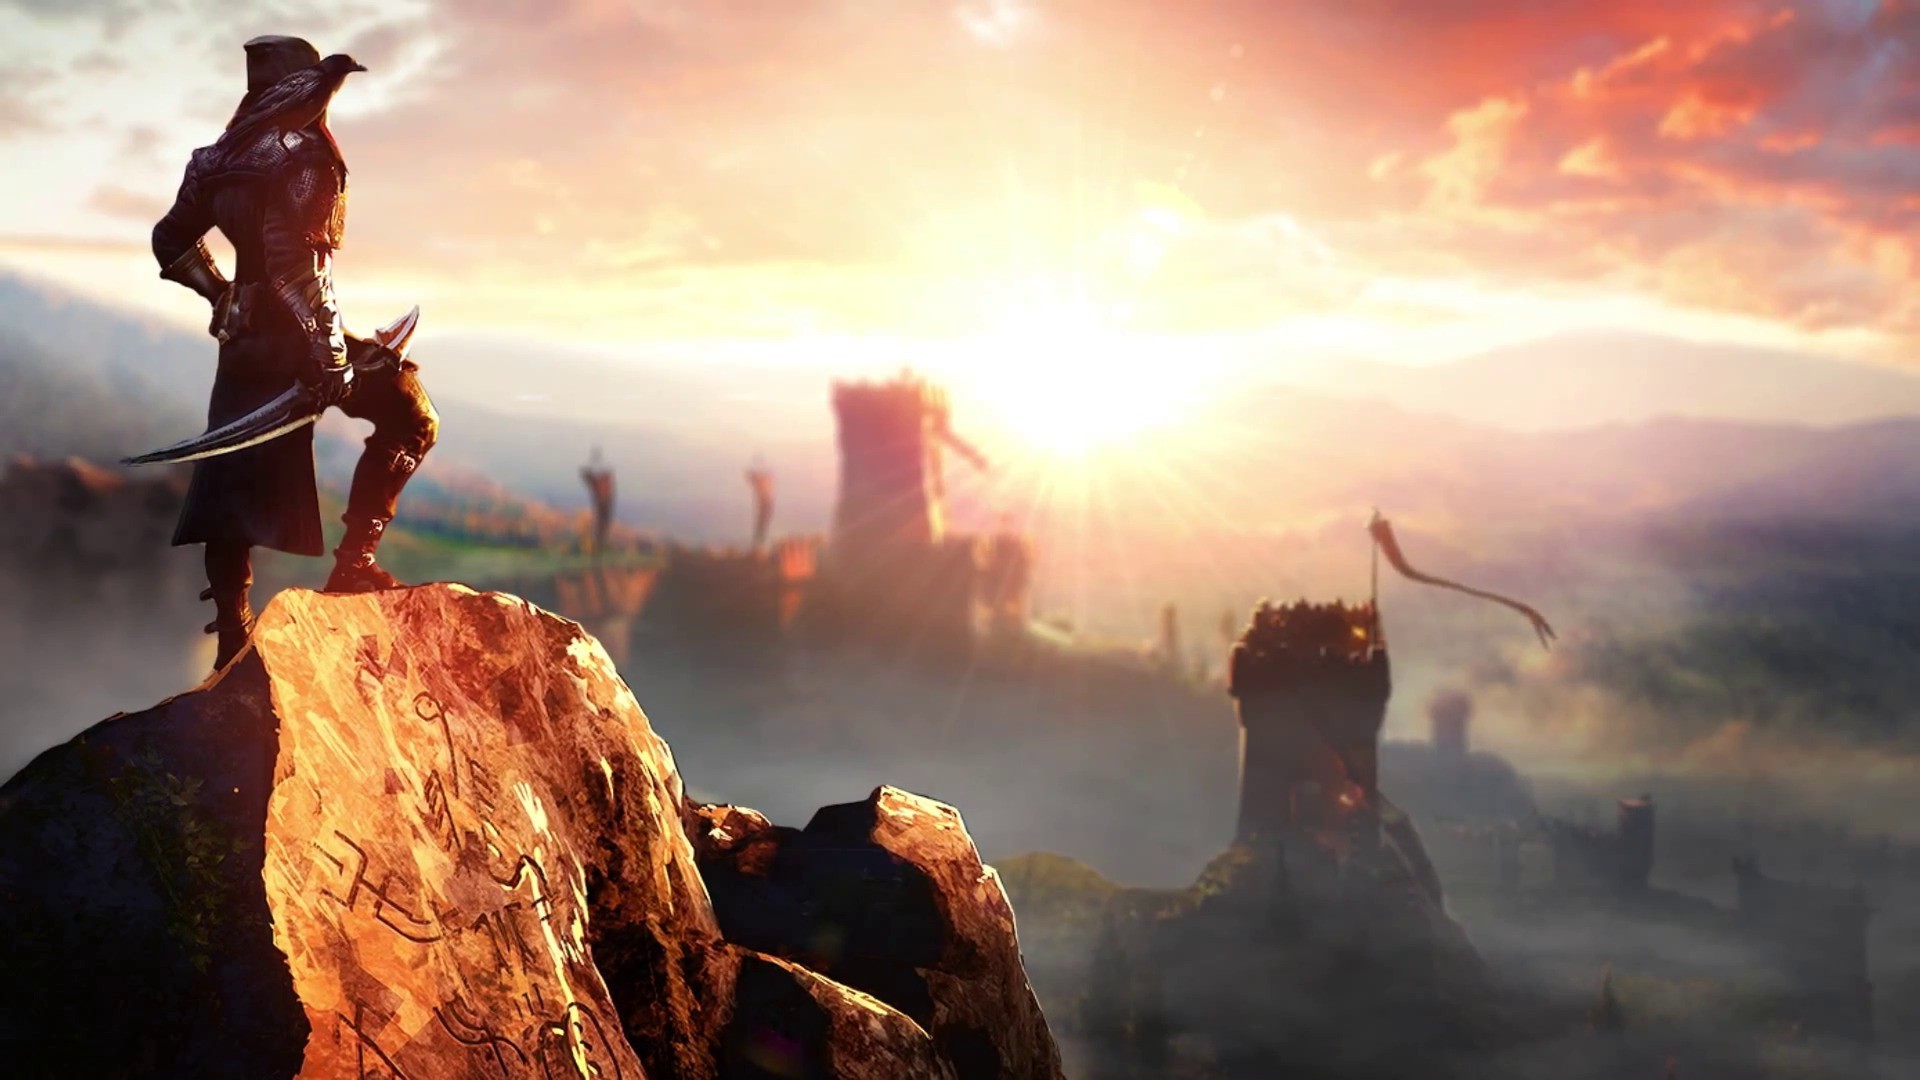 dragon age inquisition wallpaper,action adventure game,pc game,cg artwork,sky,adventure game